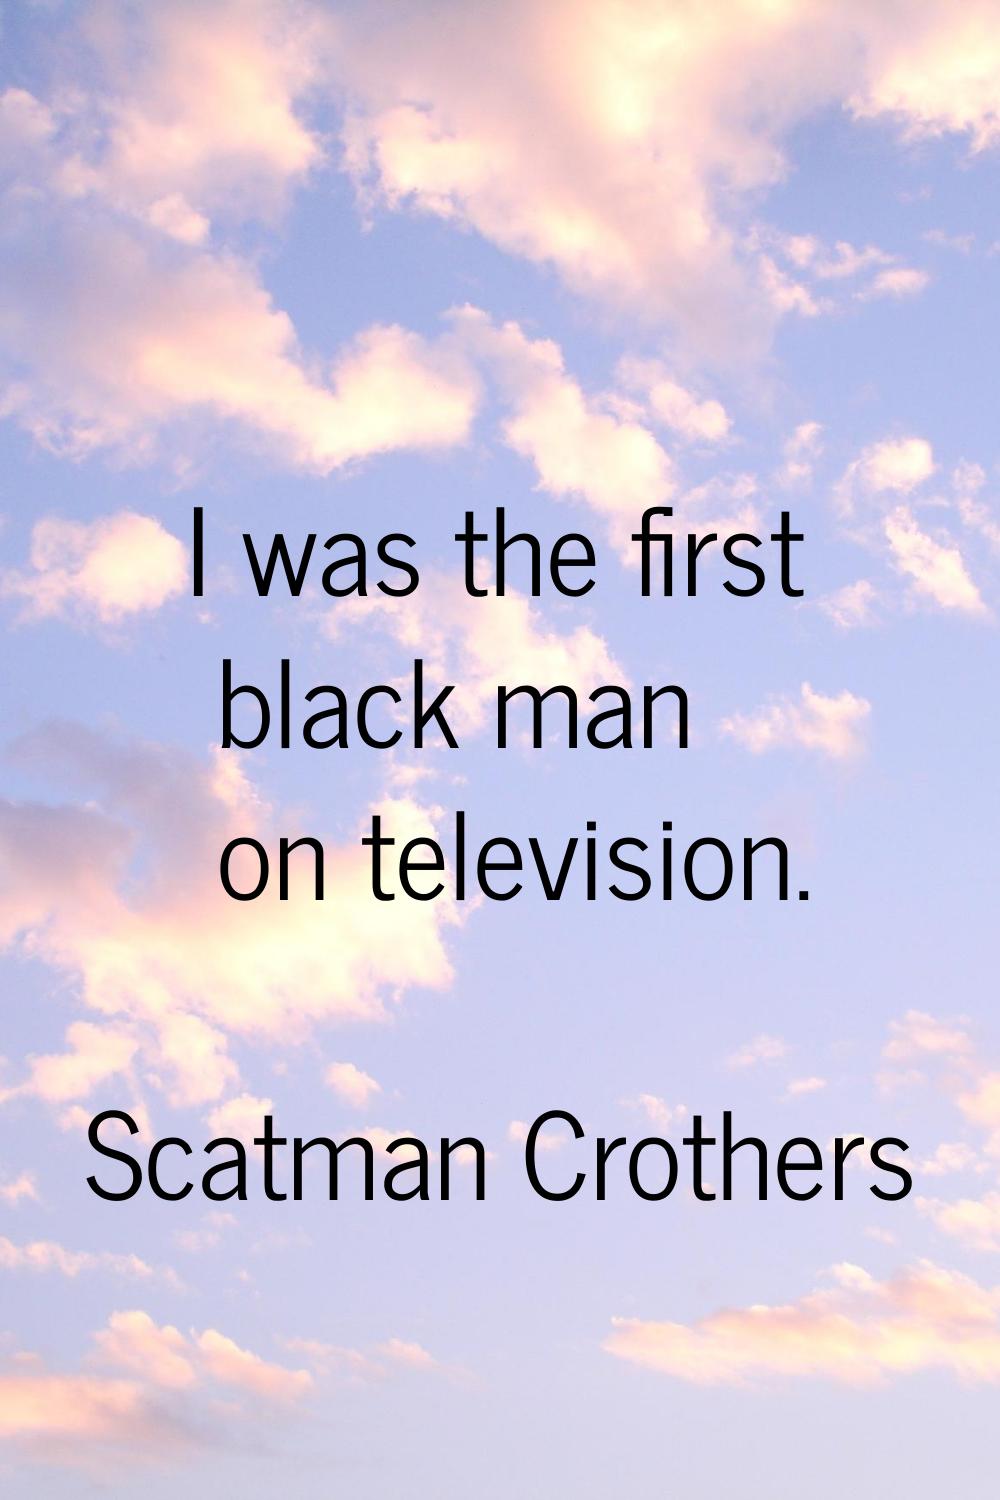 I was the first black man on television.